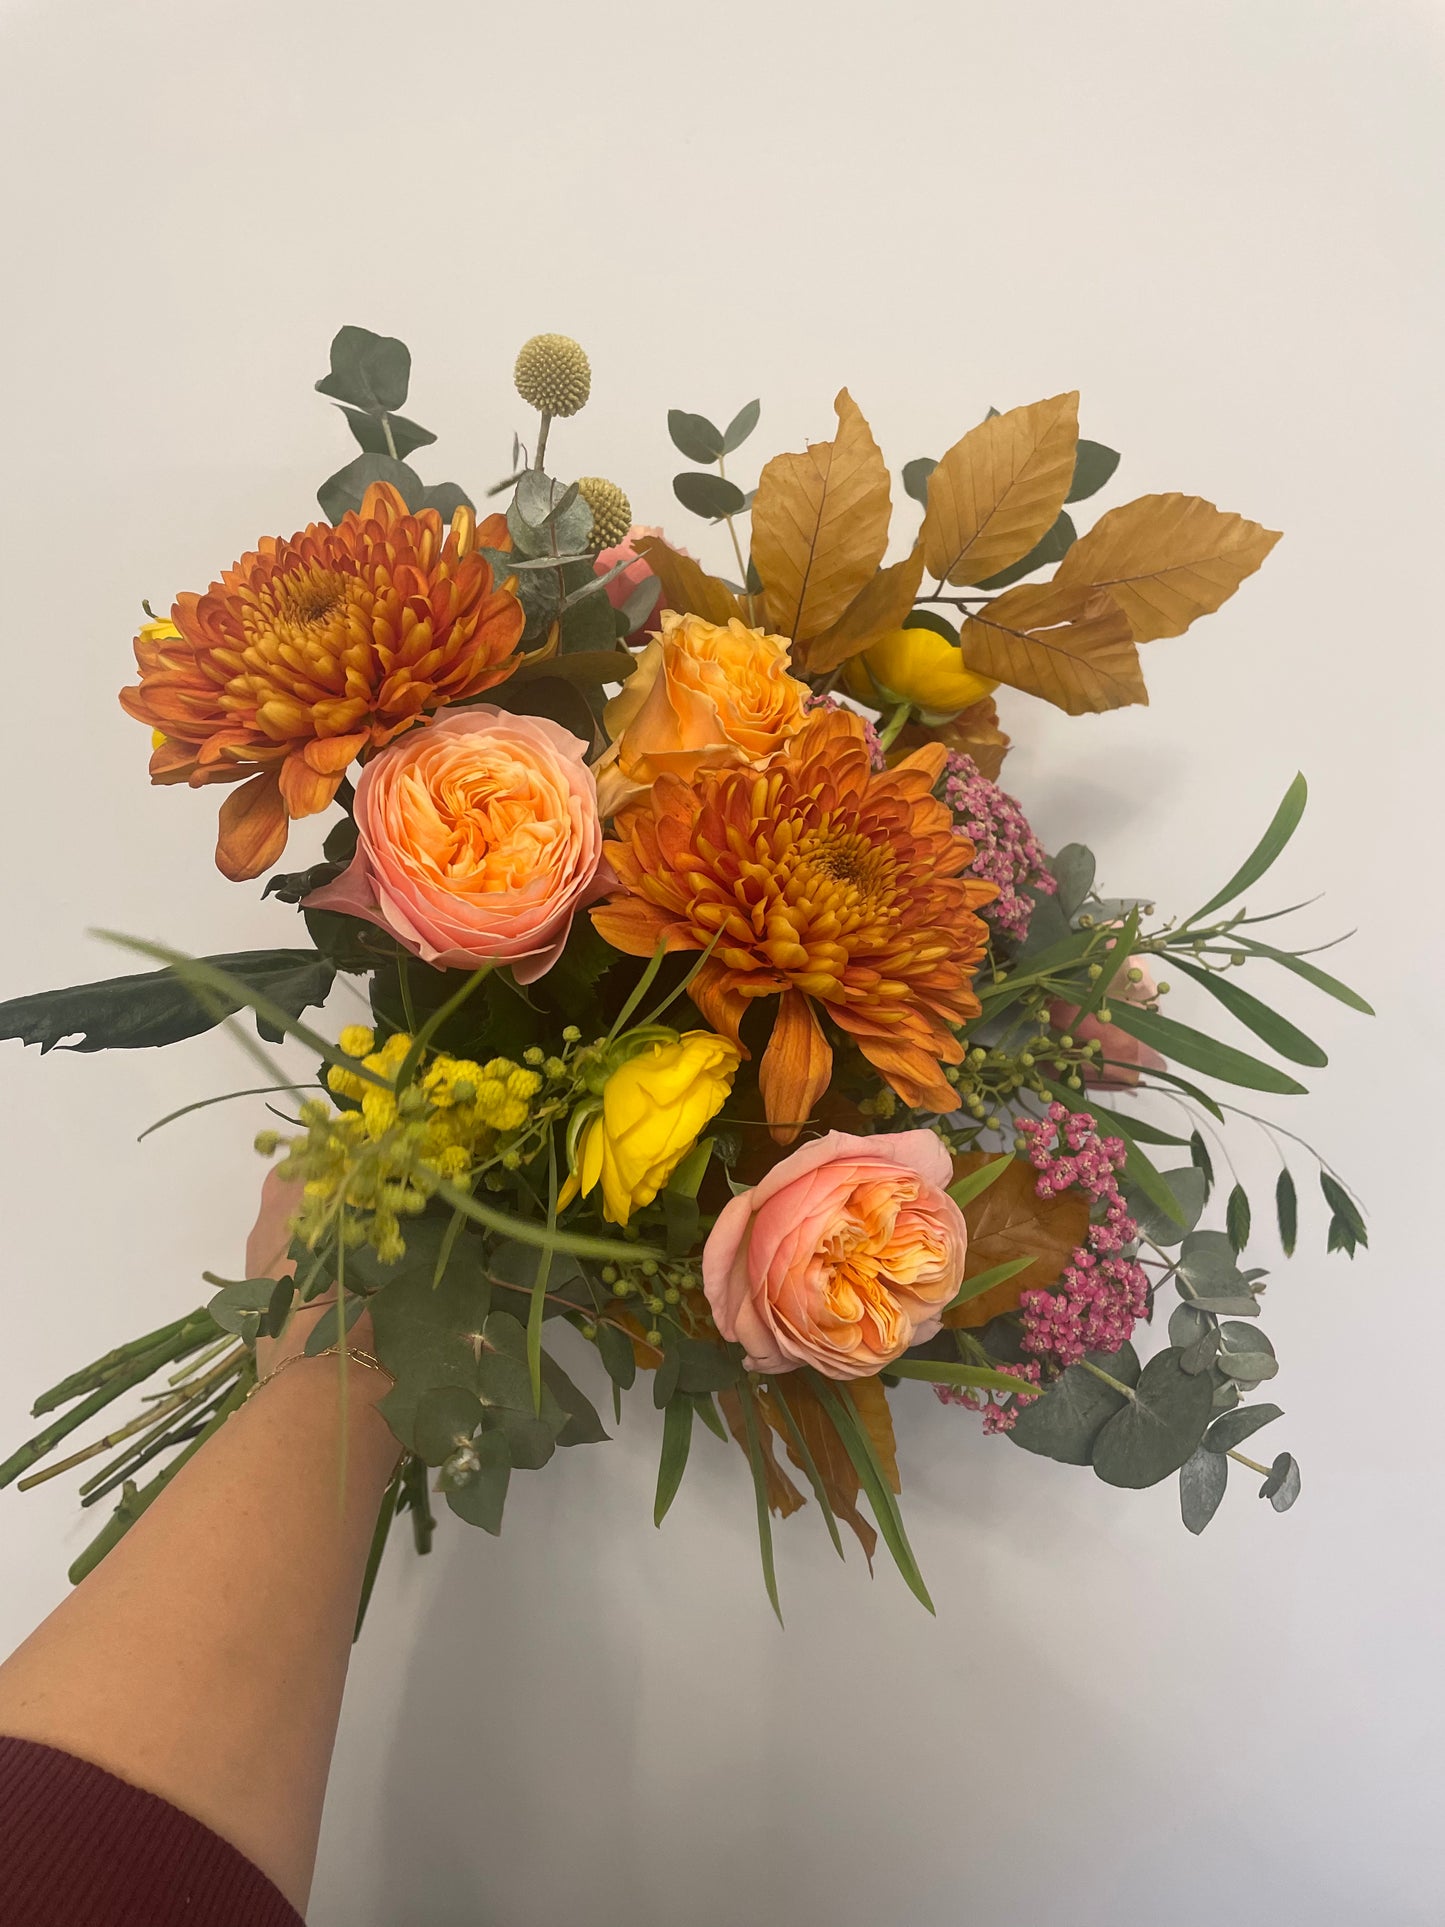 Monthly subscription flowers